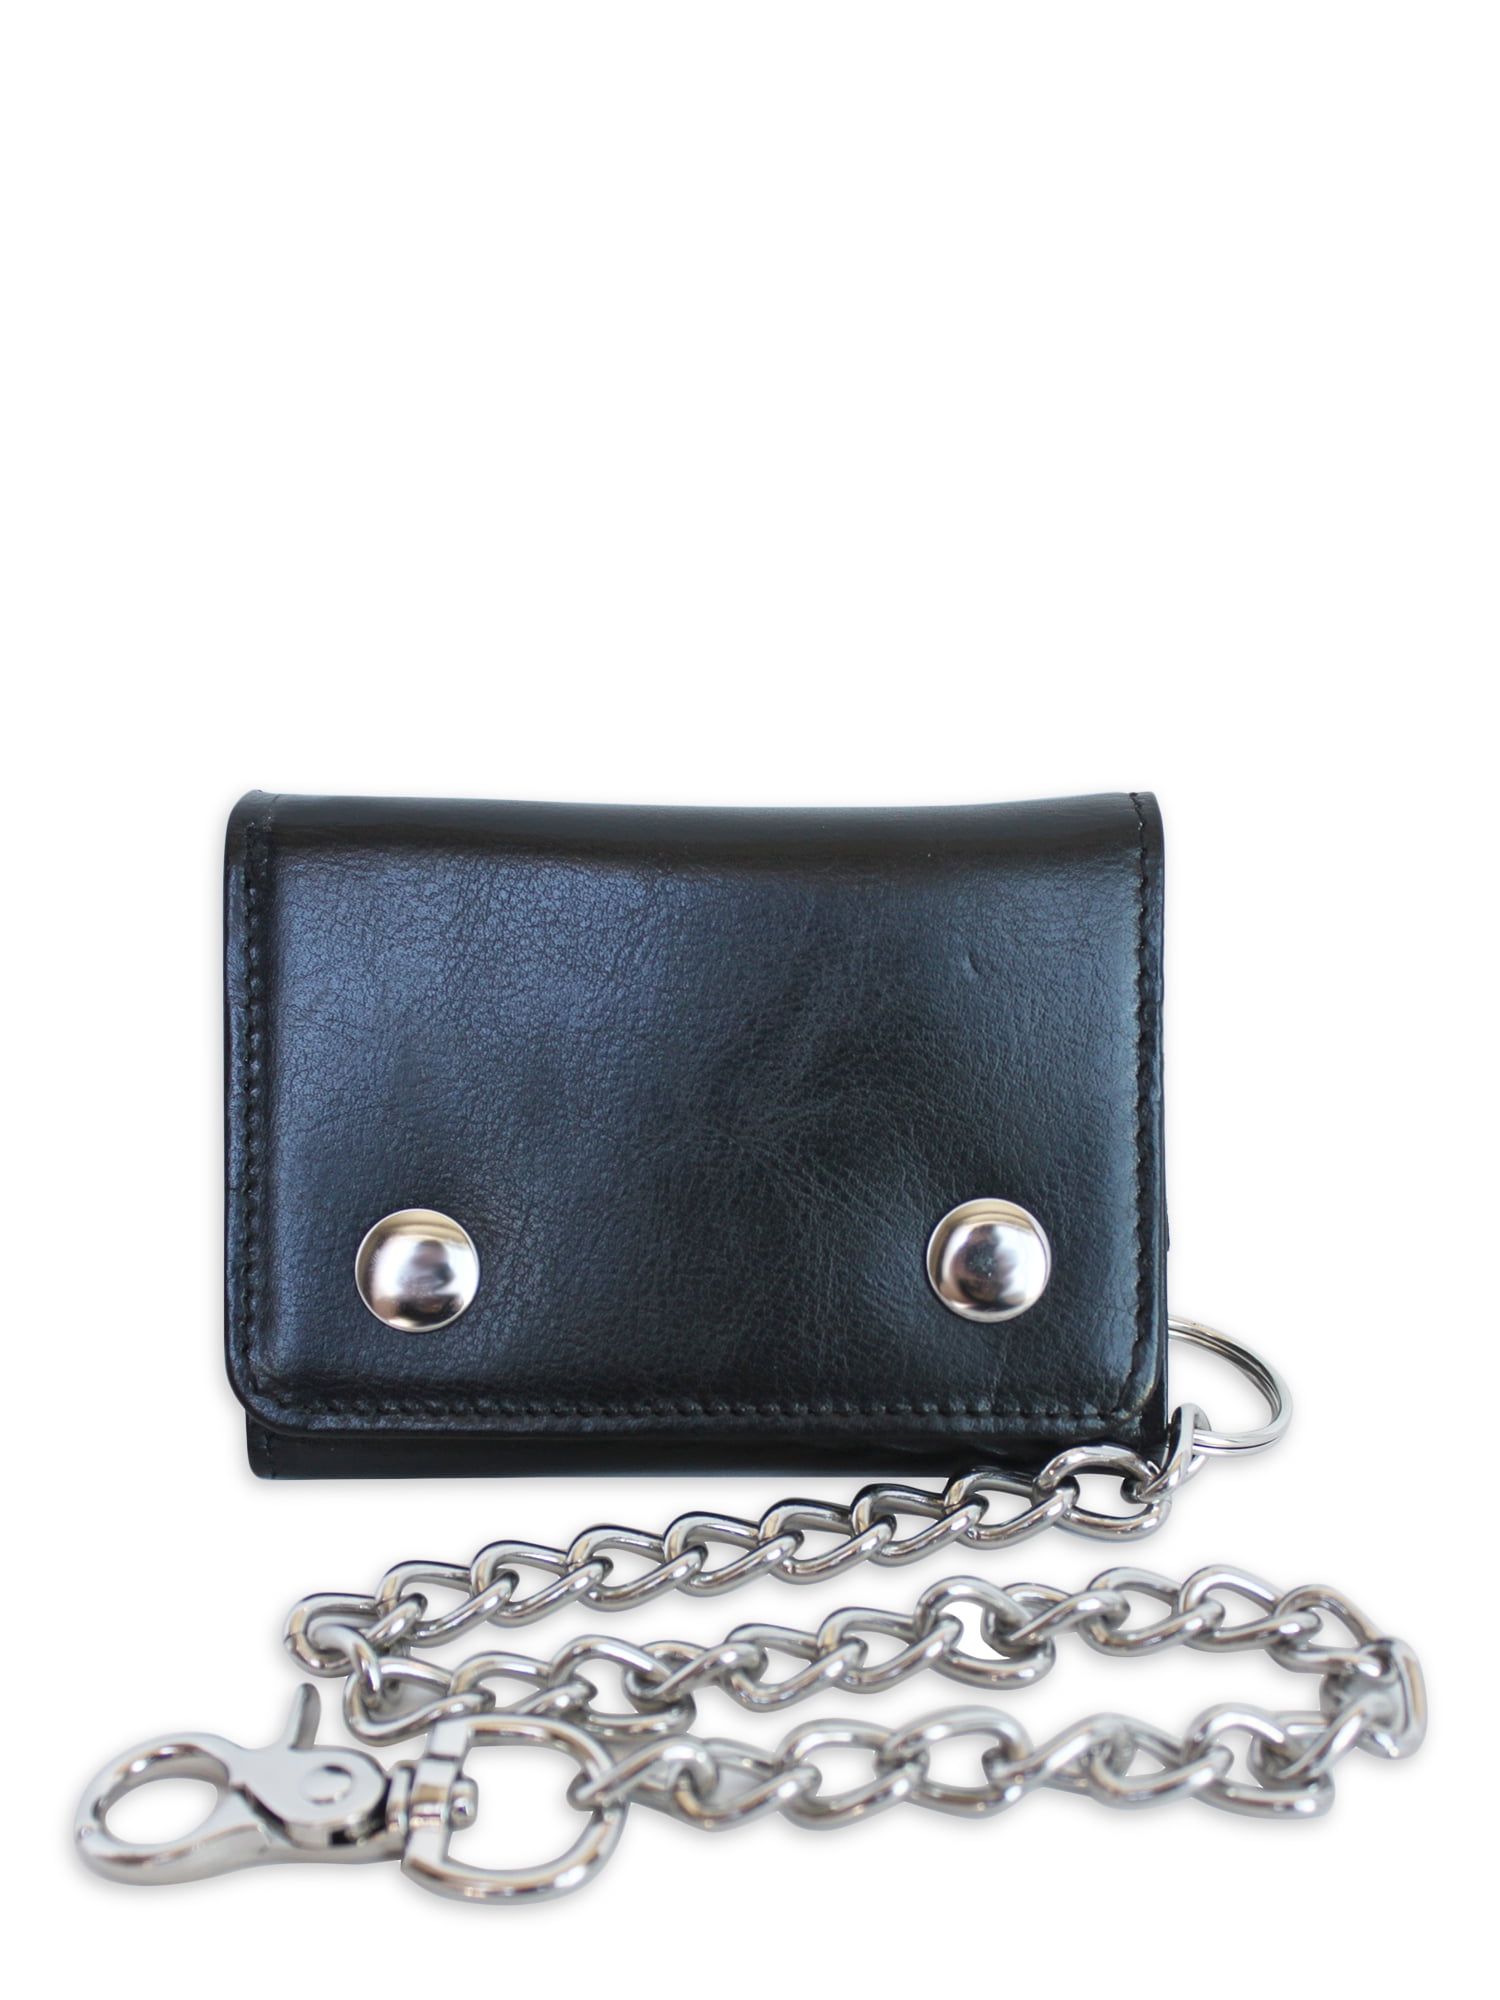 Wallet Chains: Hot or Not